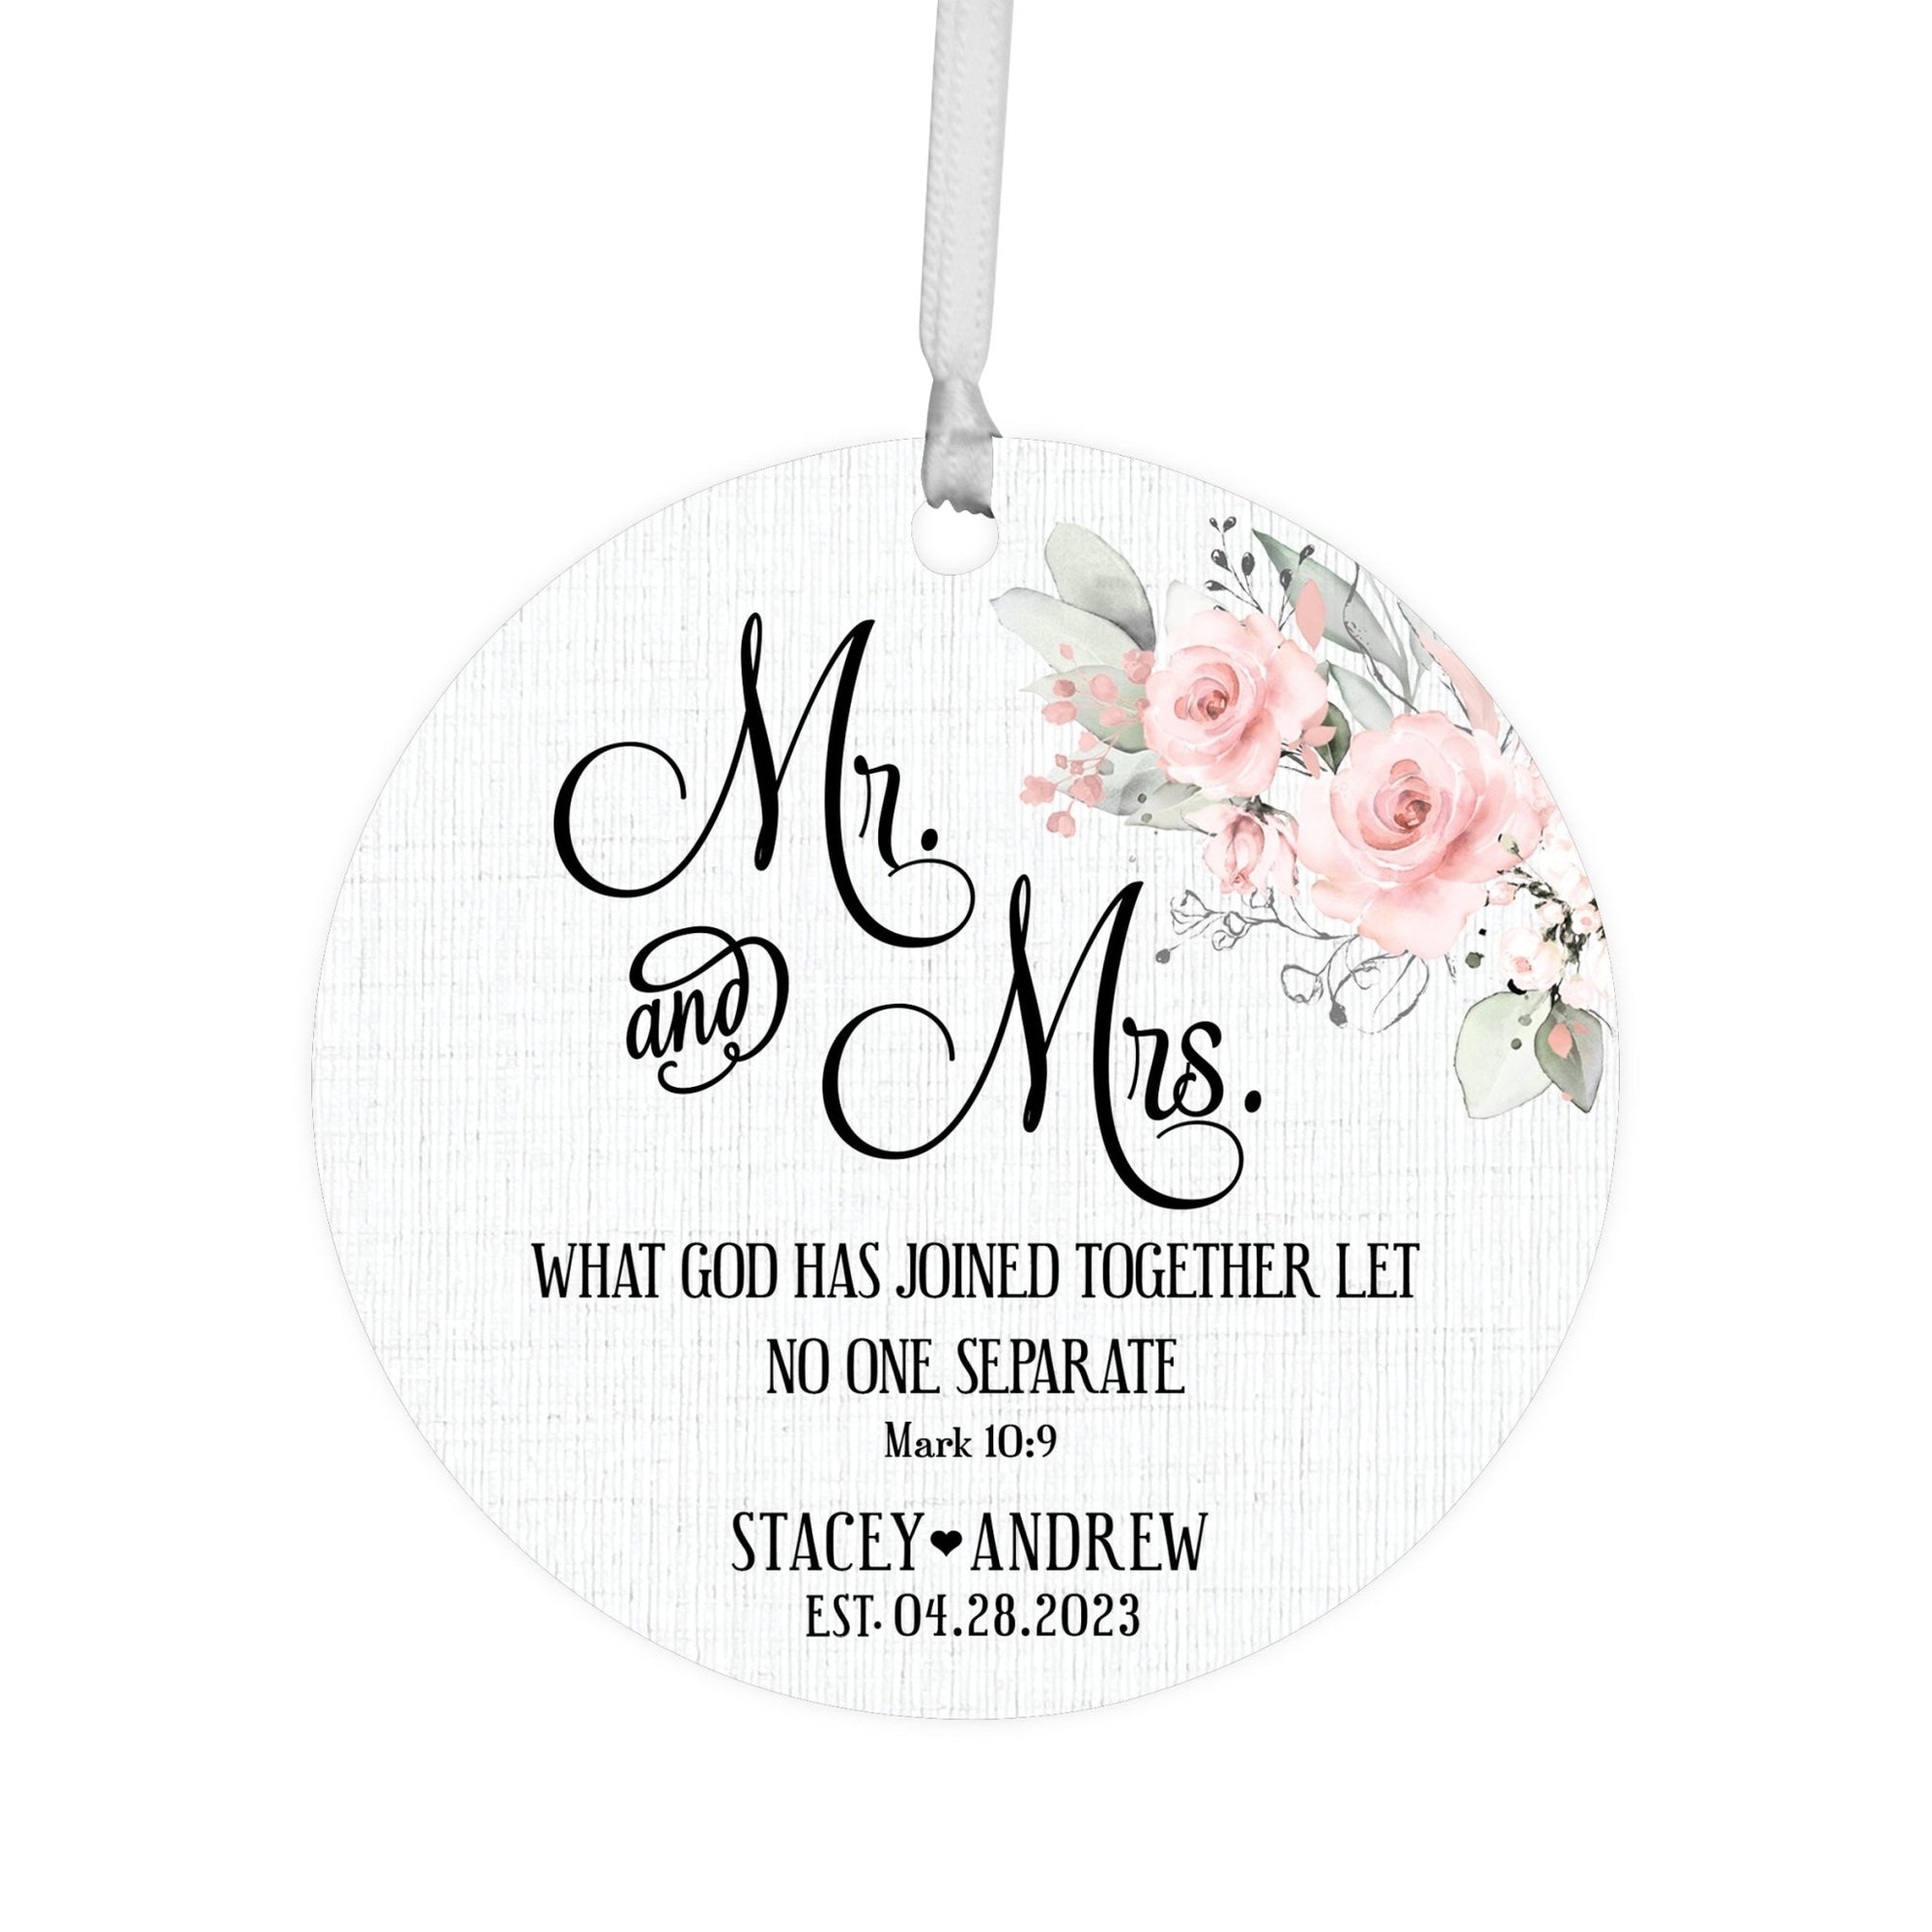 Customized Wooden Ornament Home Décor And Wedding Gift Ideas - What Has God Joined Together - LifeSong Milestones